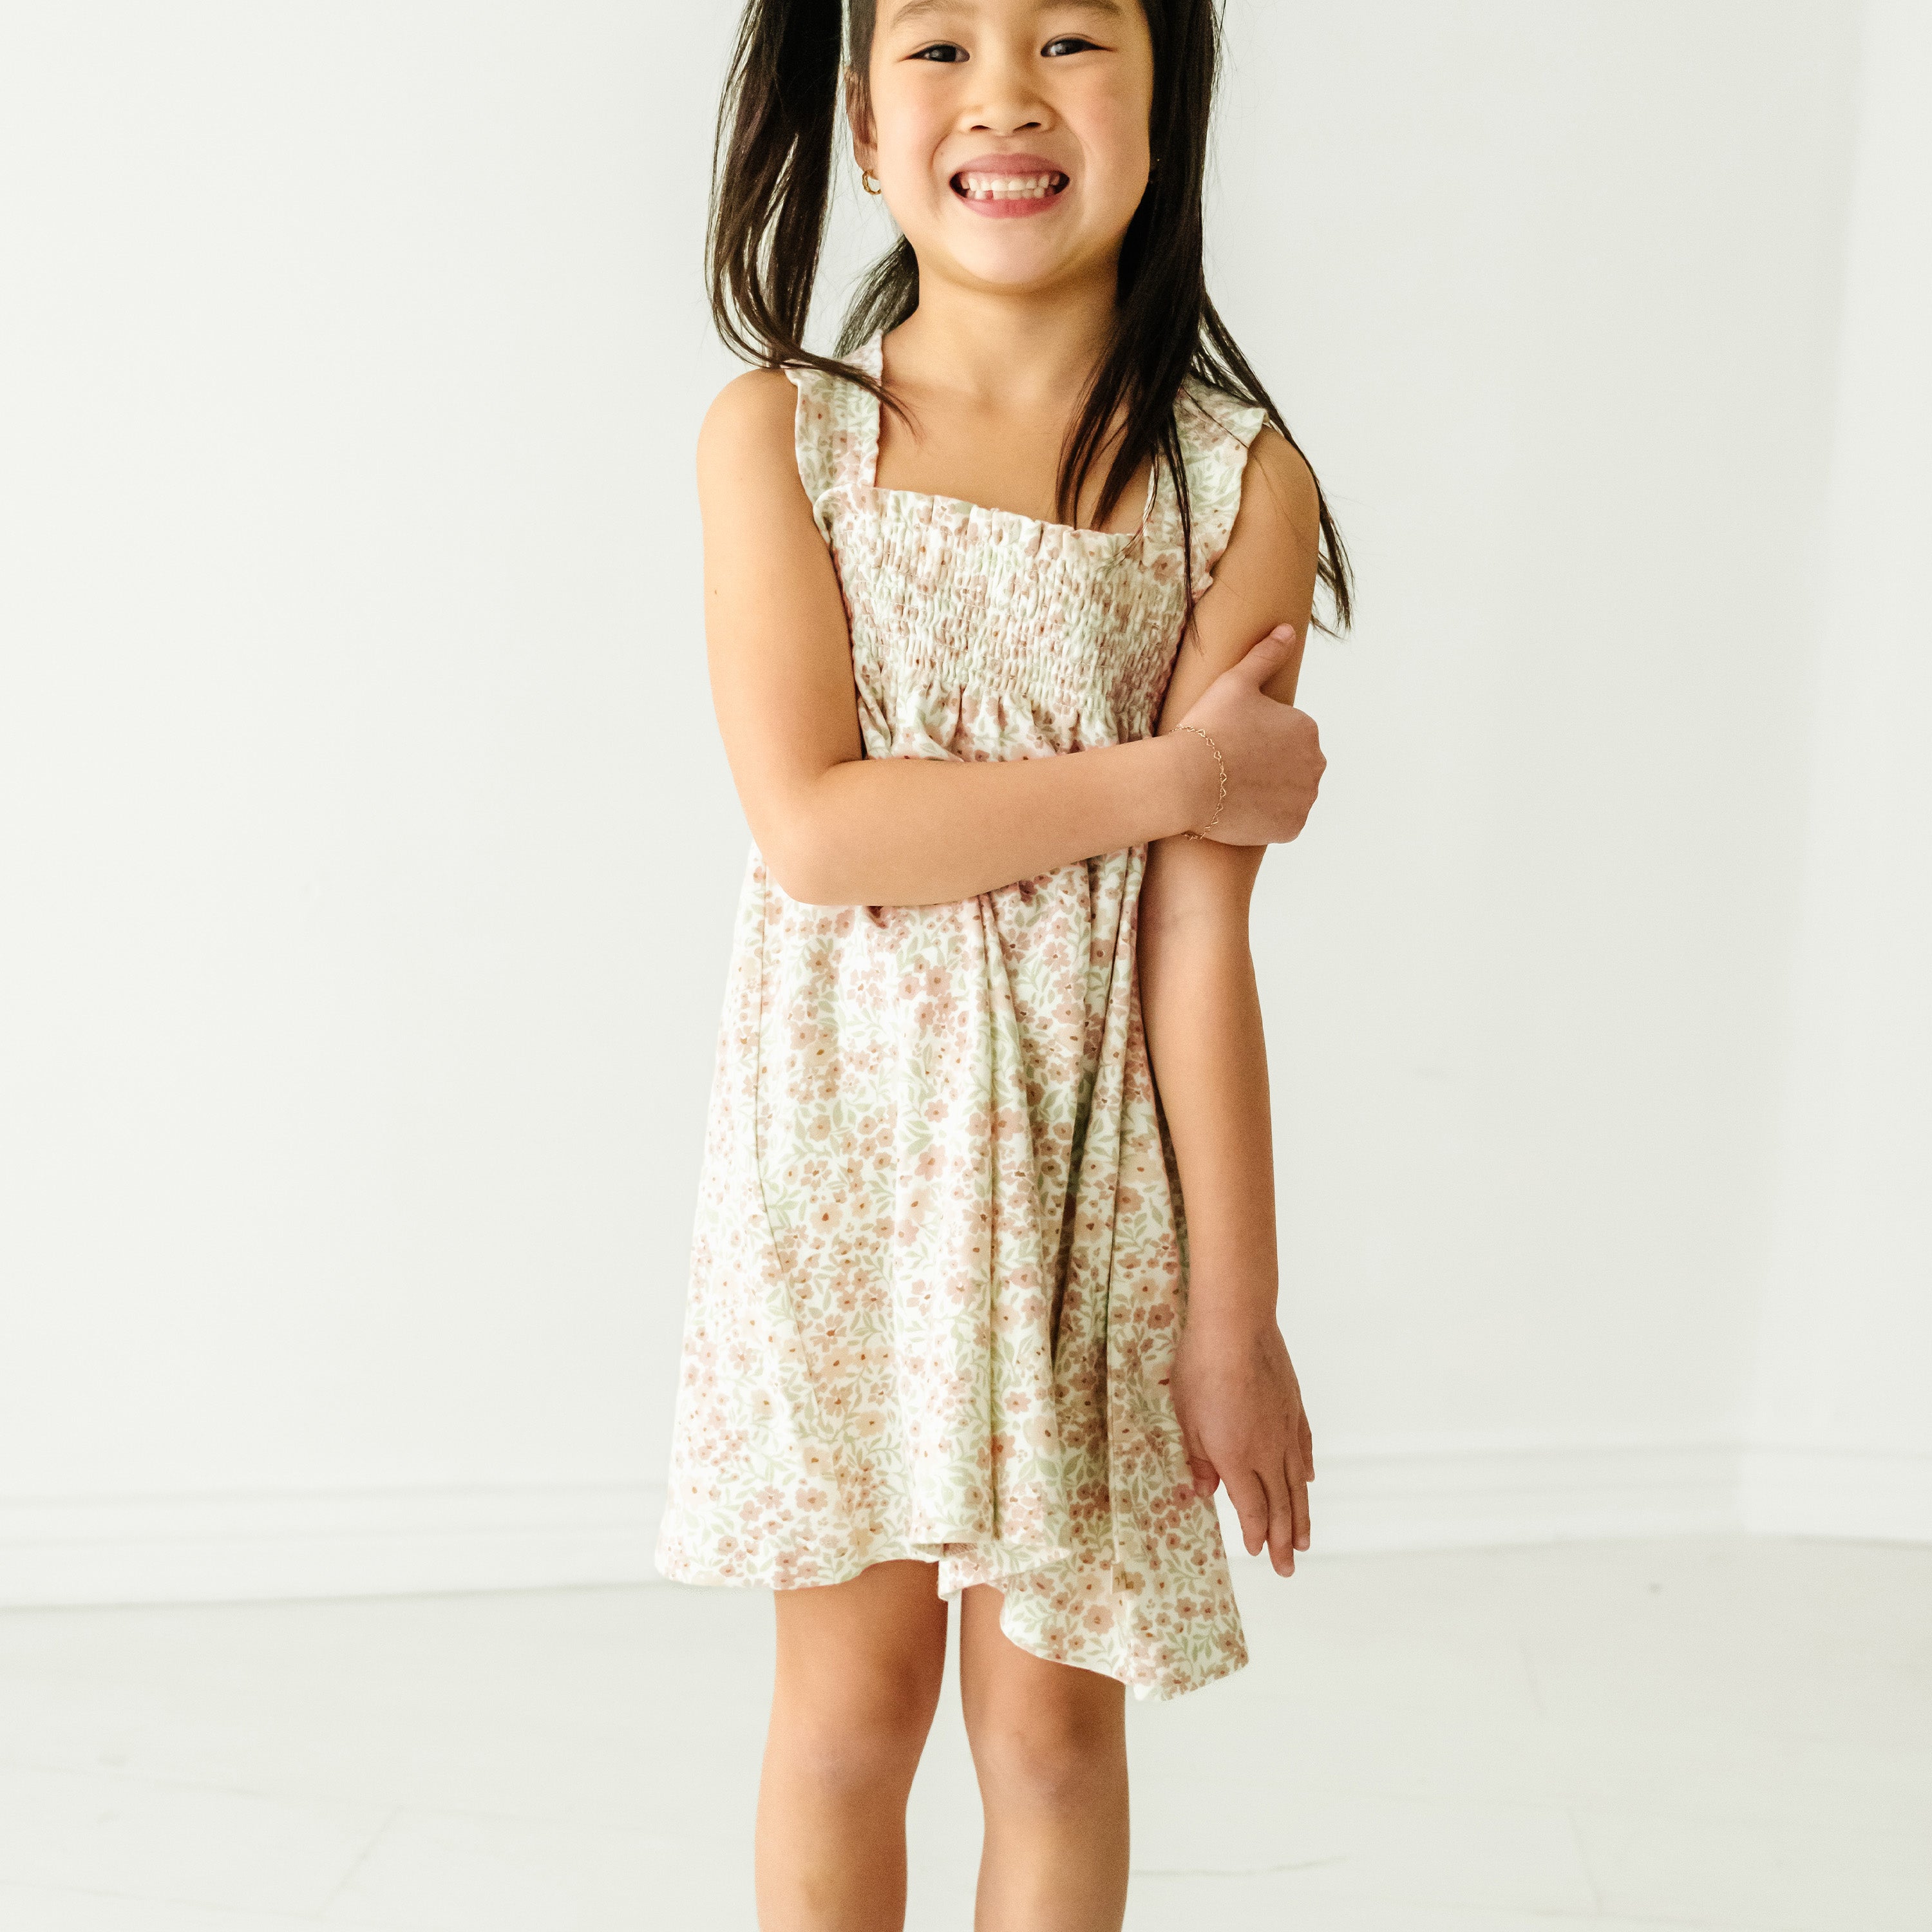 A young smiling boy with his arms crossed stands wearing a Organic Smocked Dress - Summer Floral from Makemake Organics in a bright room with a plain white background.